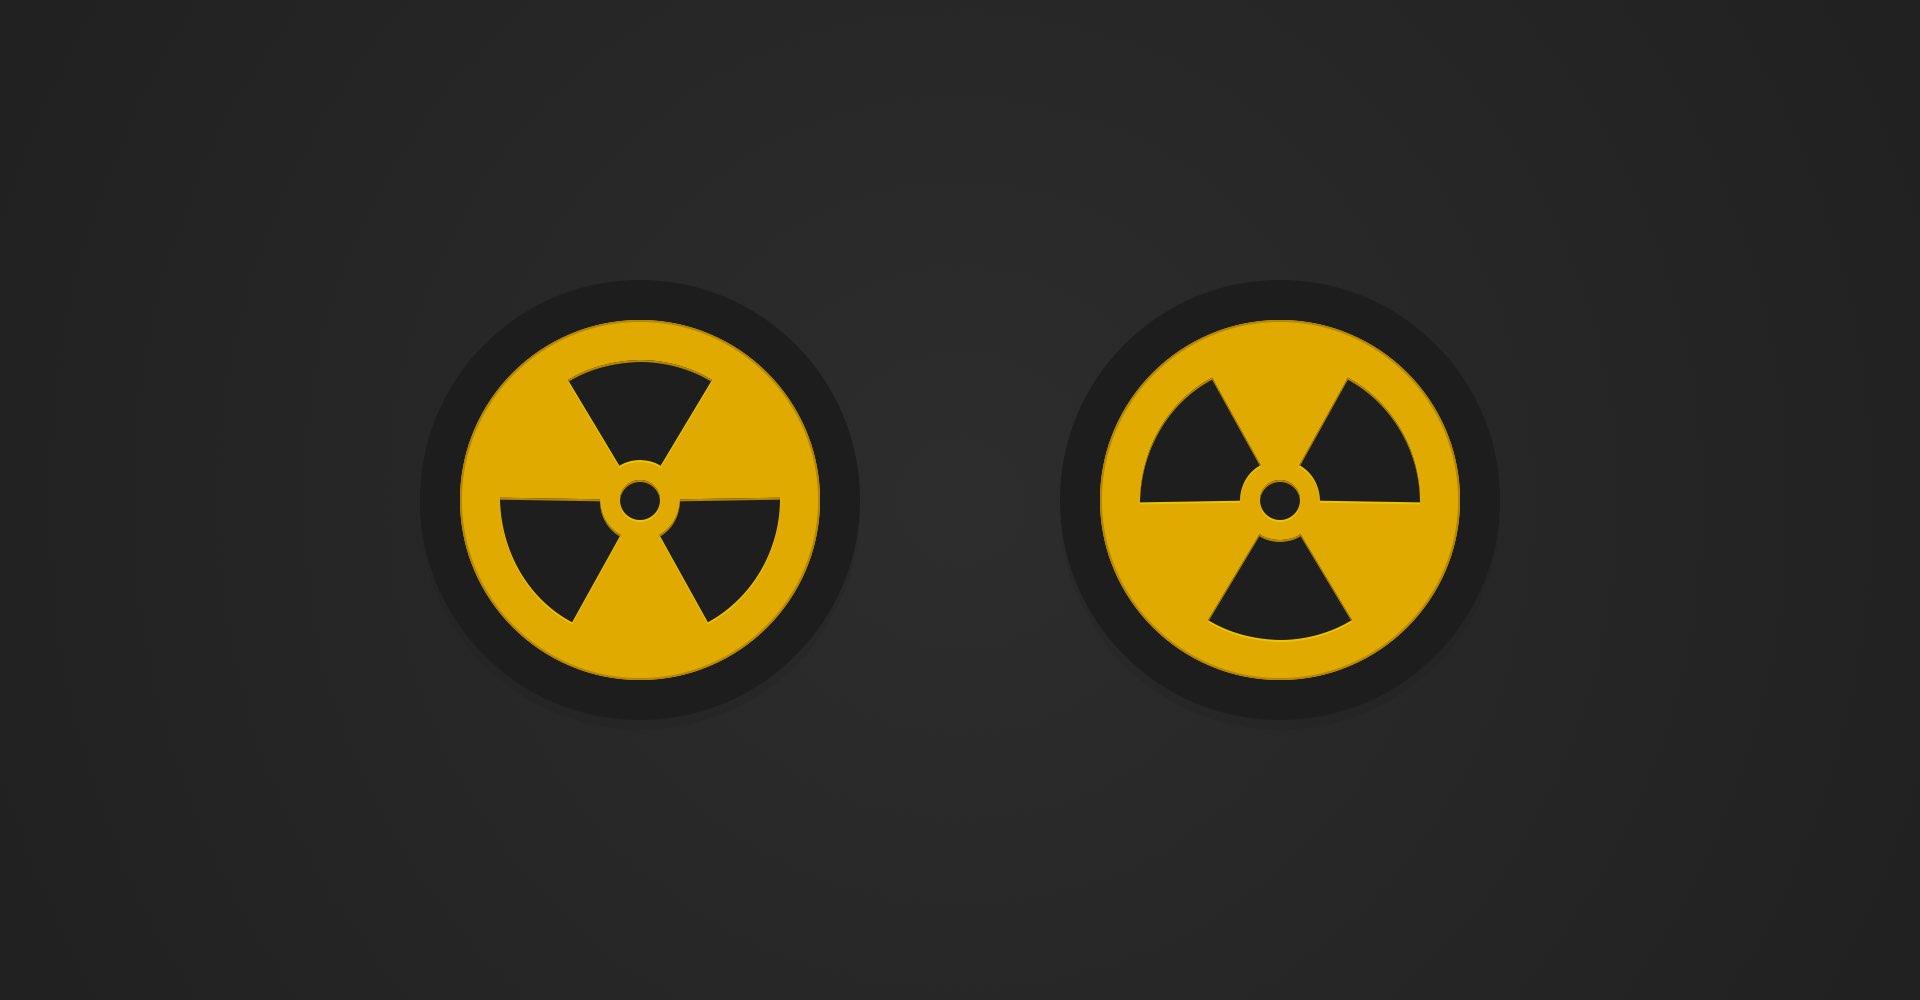 Gray and Yellow Circle Logo - Graphic - Create a Nuclear Symbol Icon